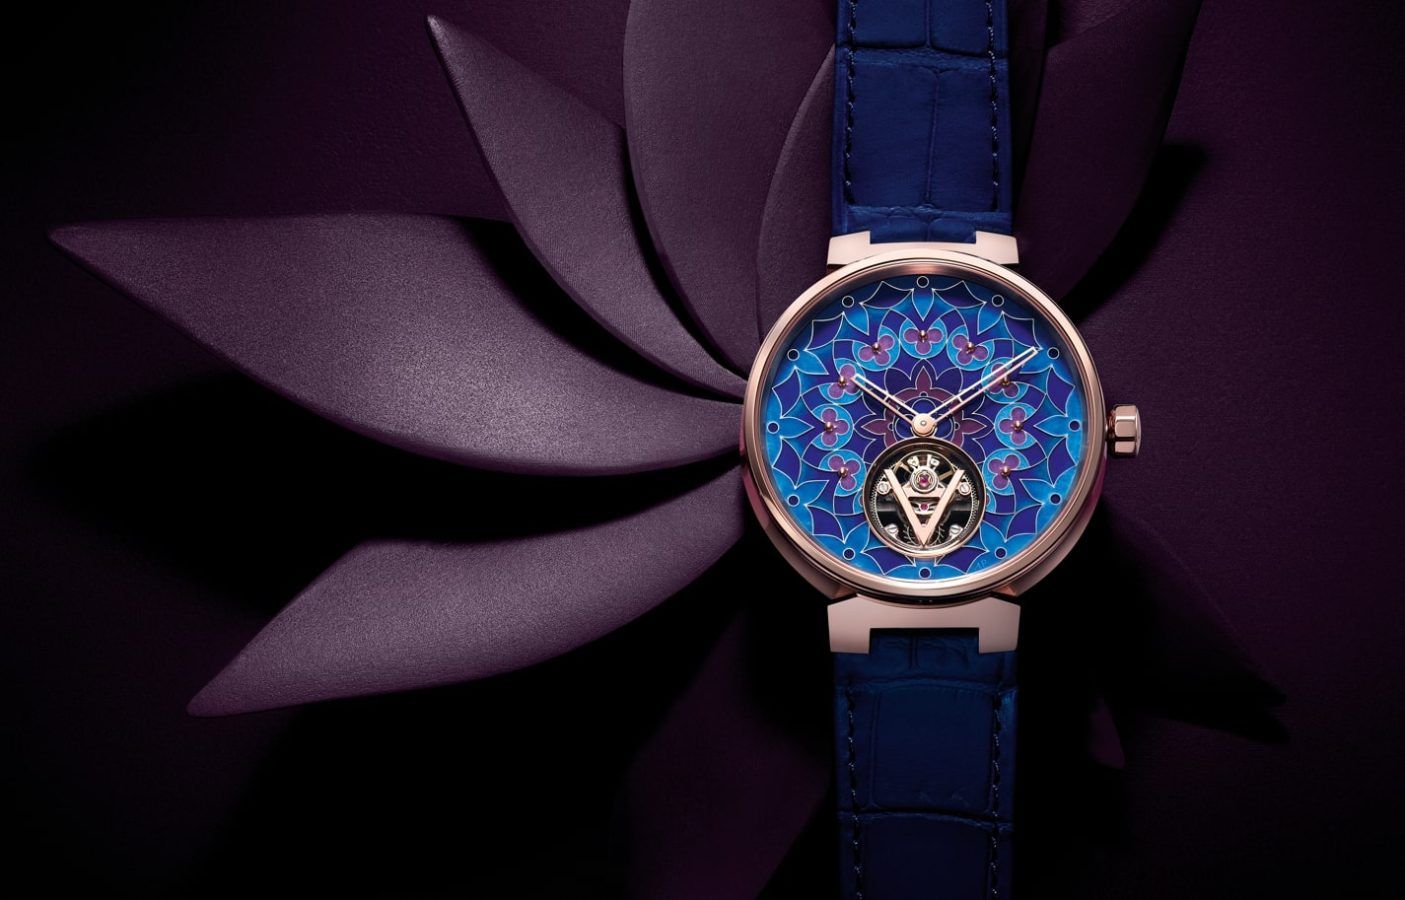 The hottest new mystery watch is Louis Vuiiton's Tambour Moon